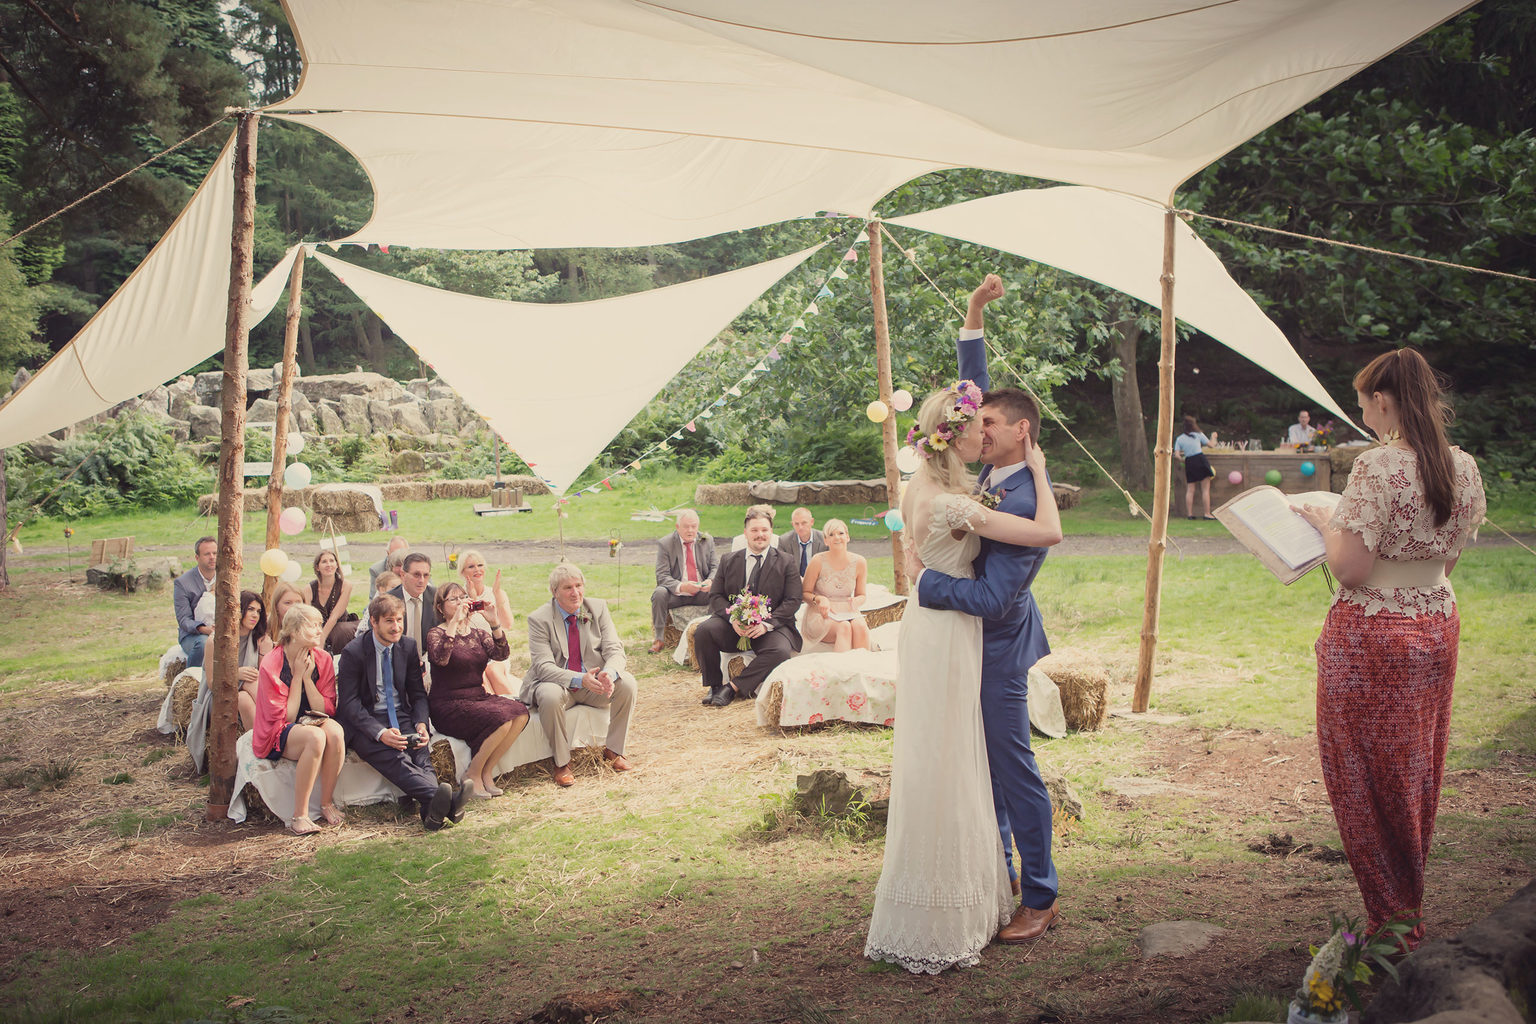 A bride and groom kissing during an outdoor boho wedding ceremony in the woodland at Swinton Bivouac in North Yorkshire. Photo by Lissa Alexander.